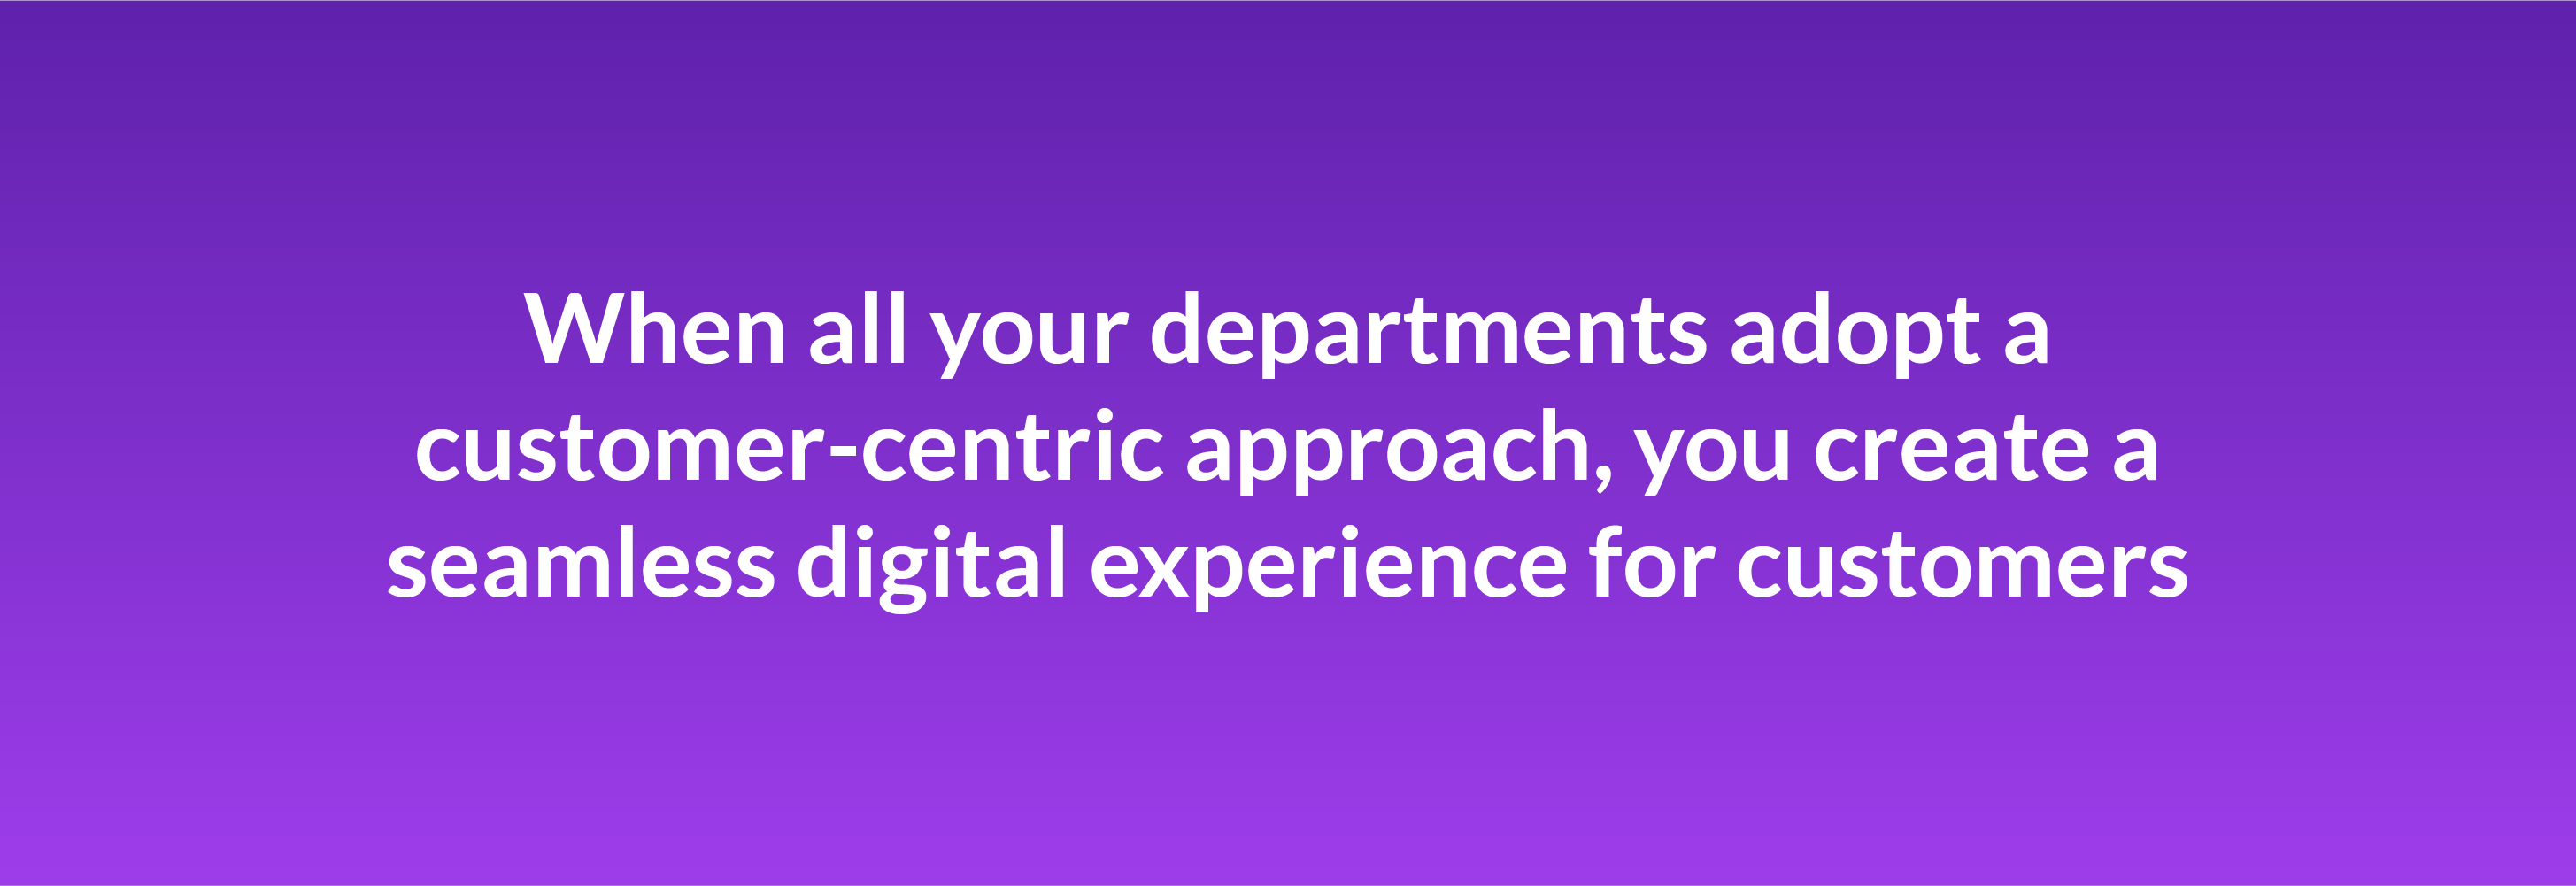 When all your departments adopt a customer-centric approach, you create a seamless digital experience for customers